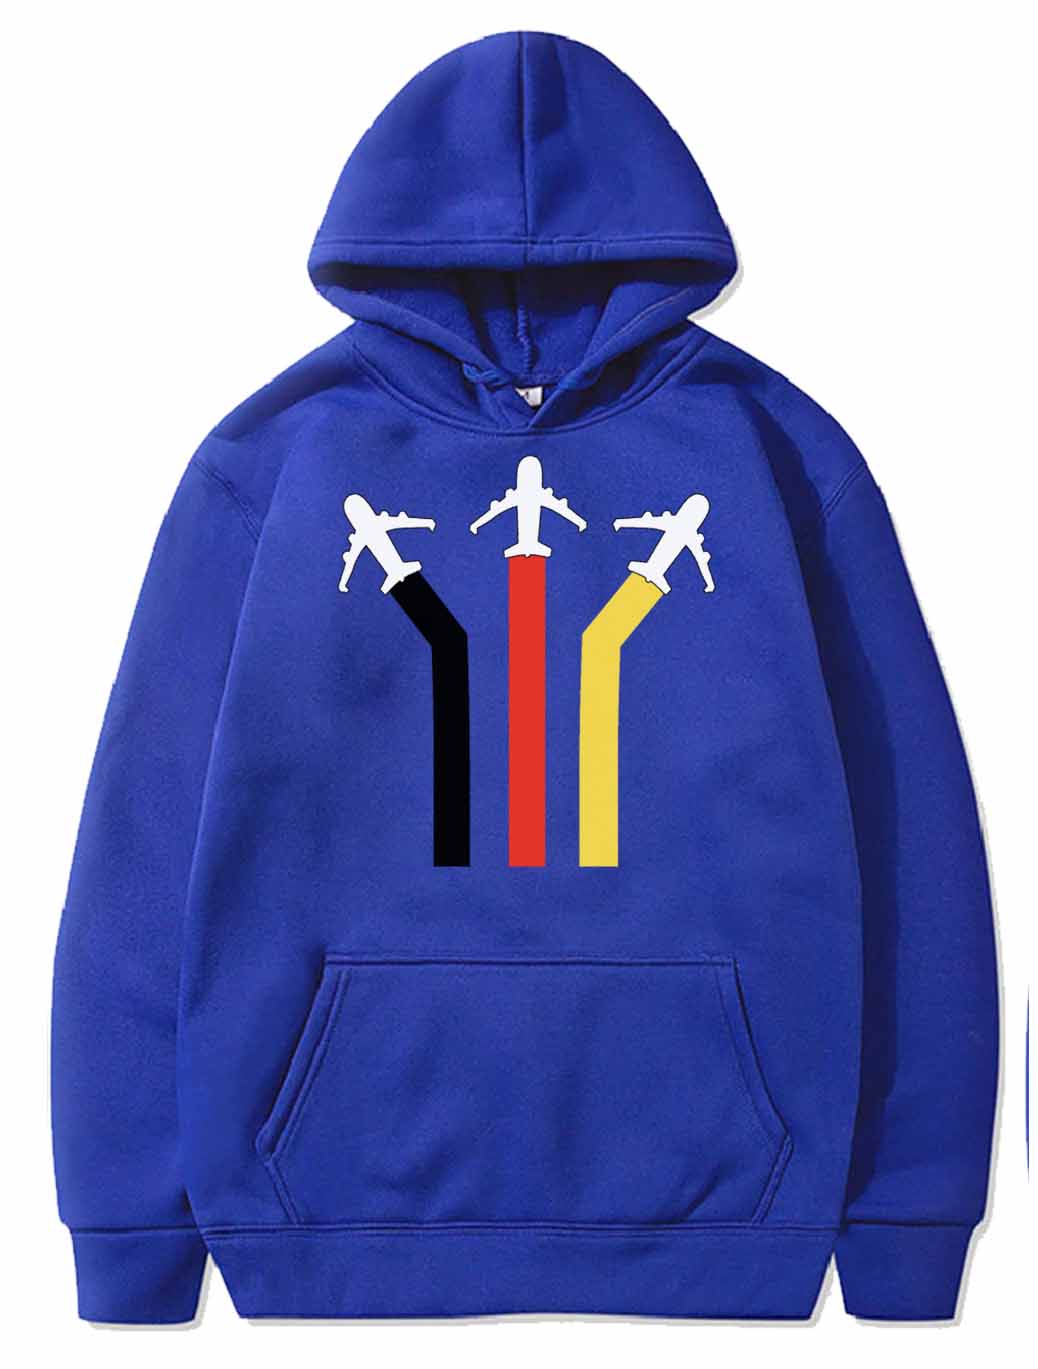 Pilot airplane airplanes gift PULLOVER THE AV8R